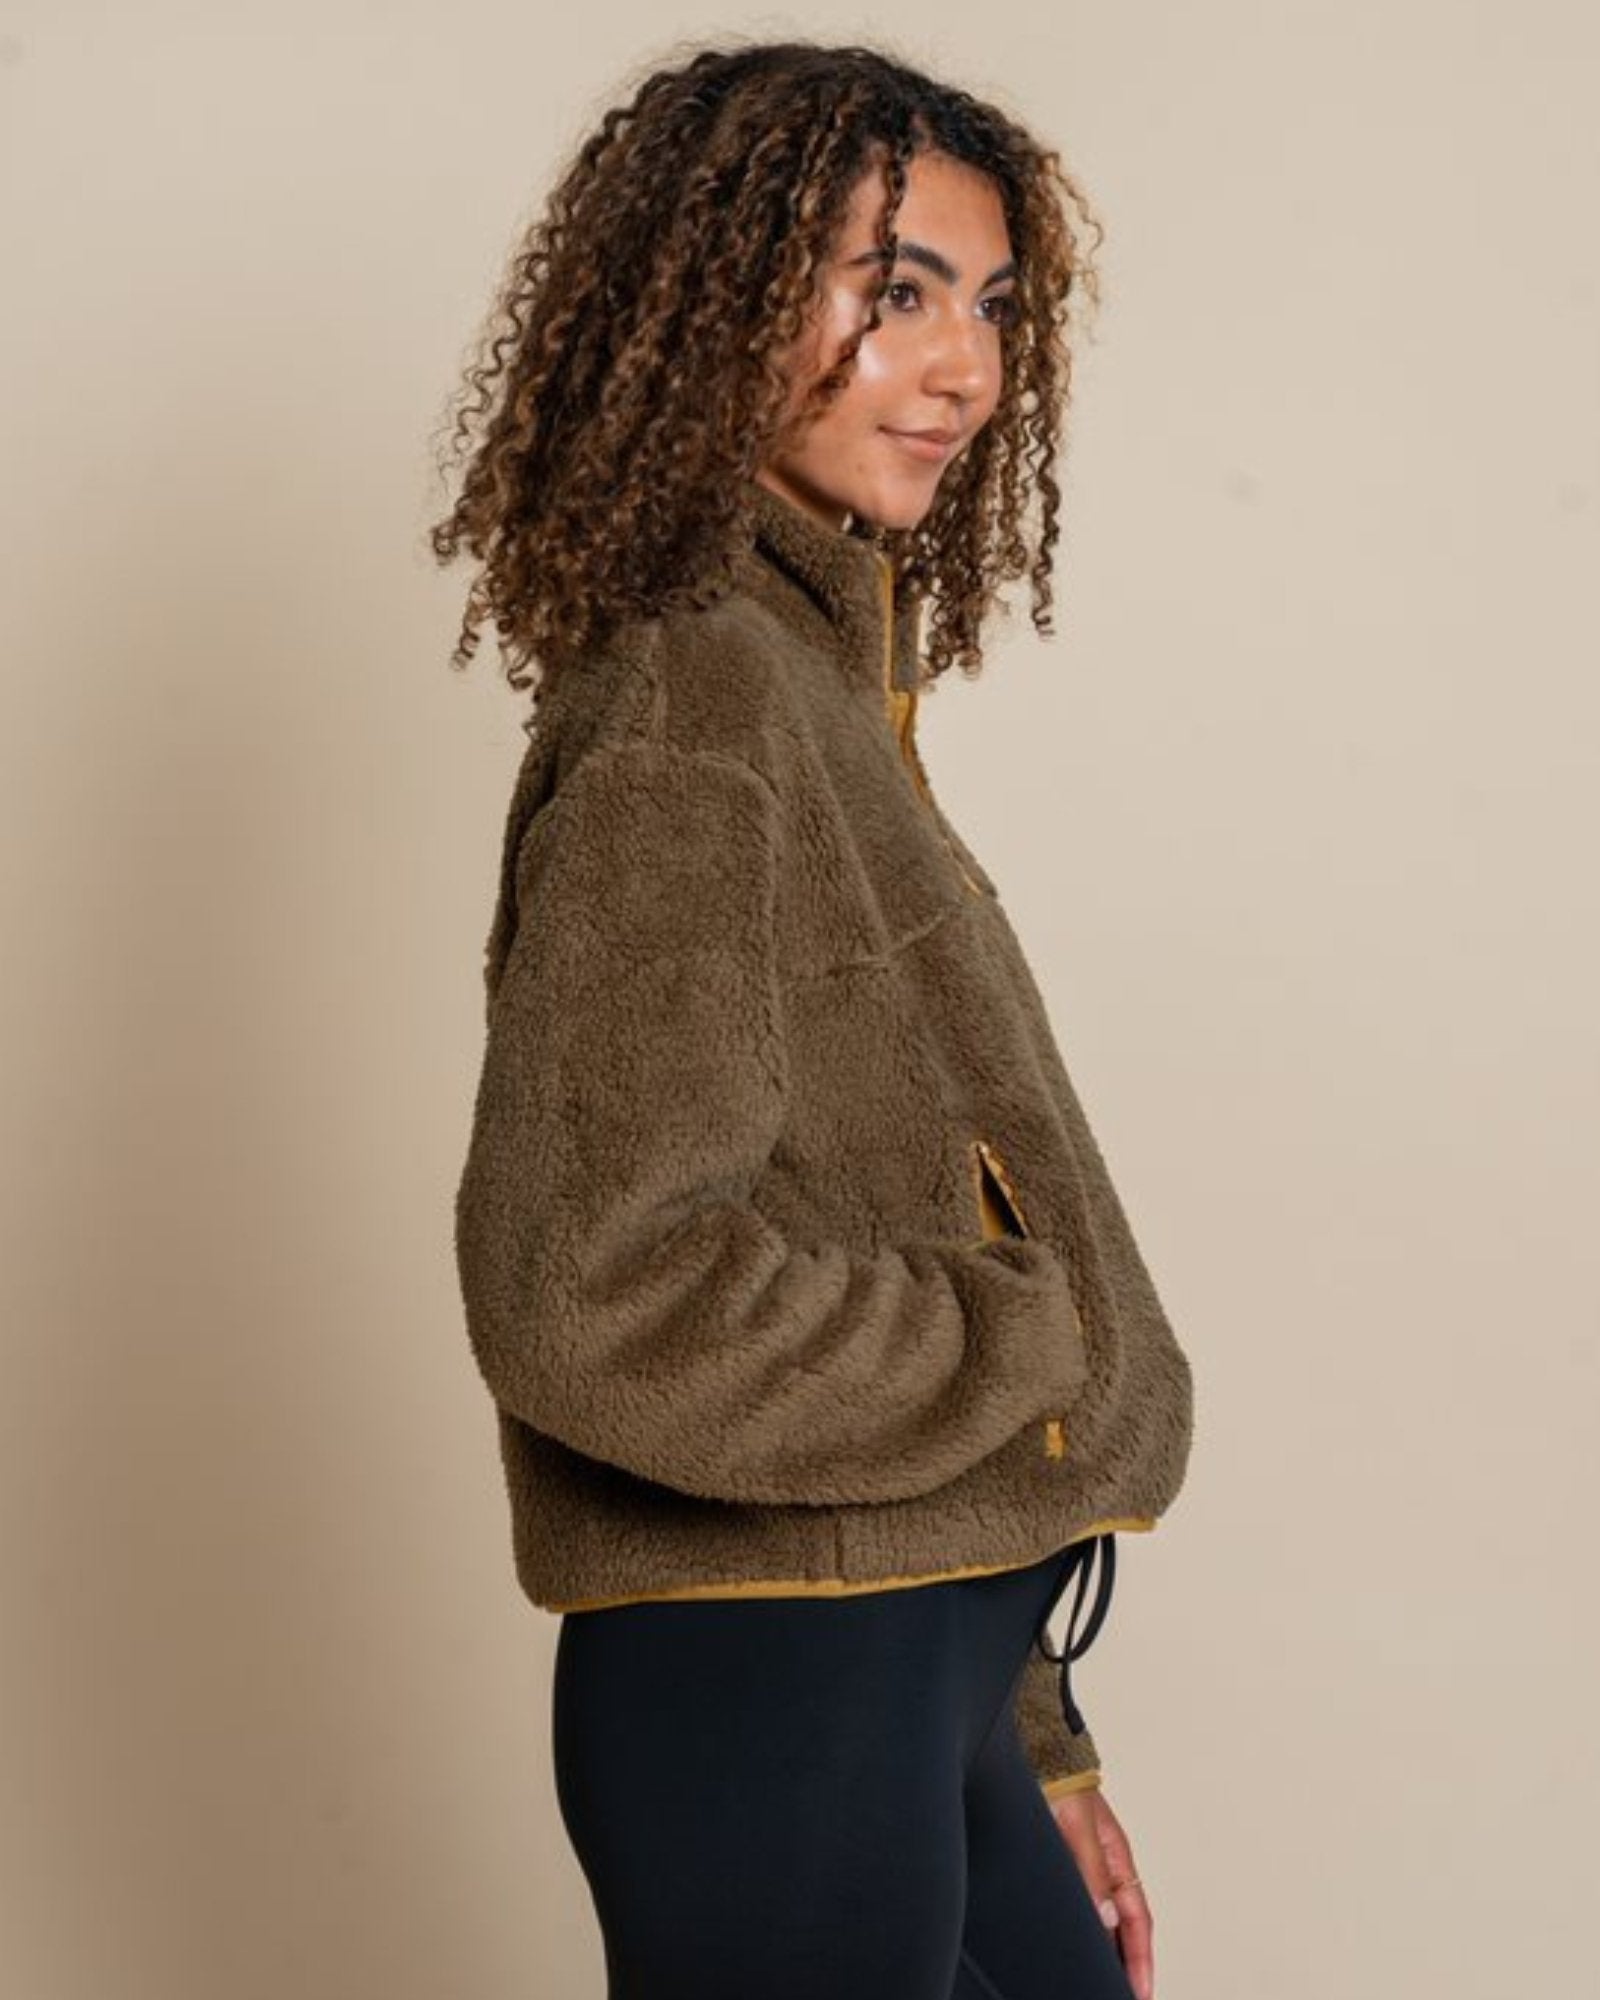 Fleece Recycled Half-Zip Jacket by Girlfriend Collective - OAT & OCHRE | Slow Fashion, Organic, Ethically-Made